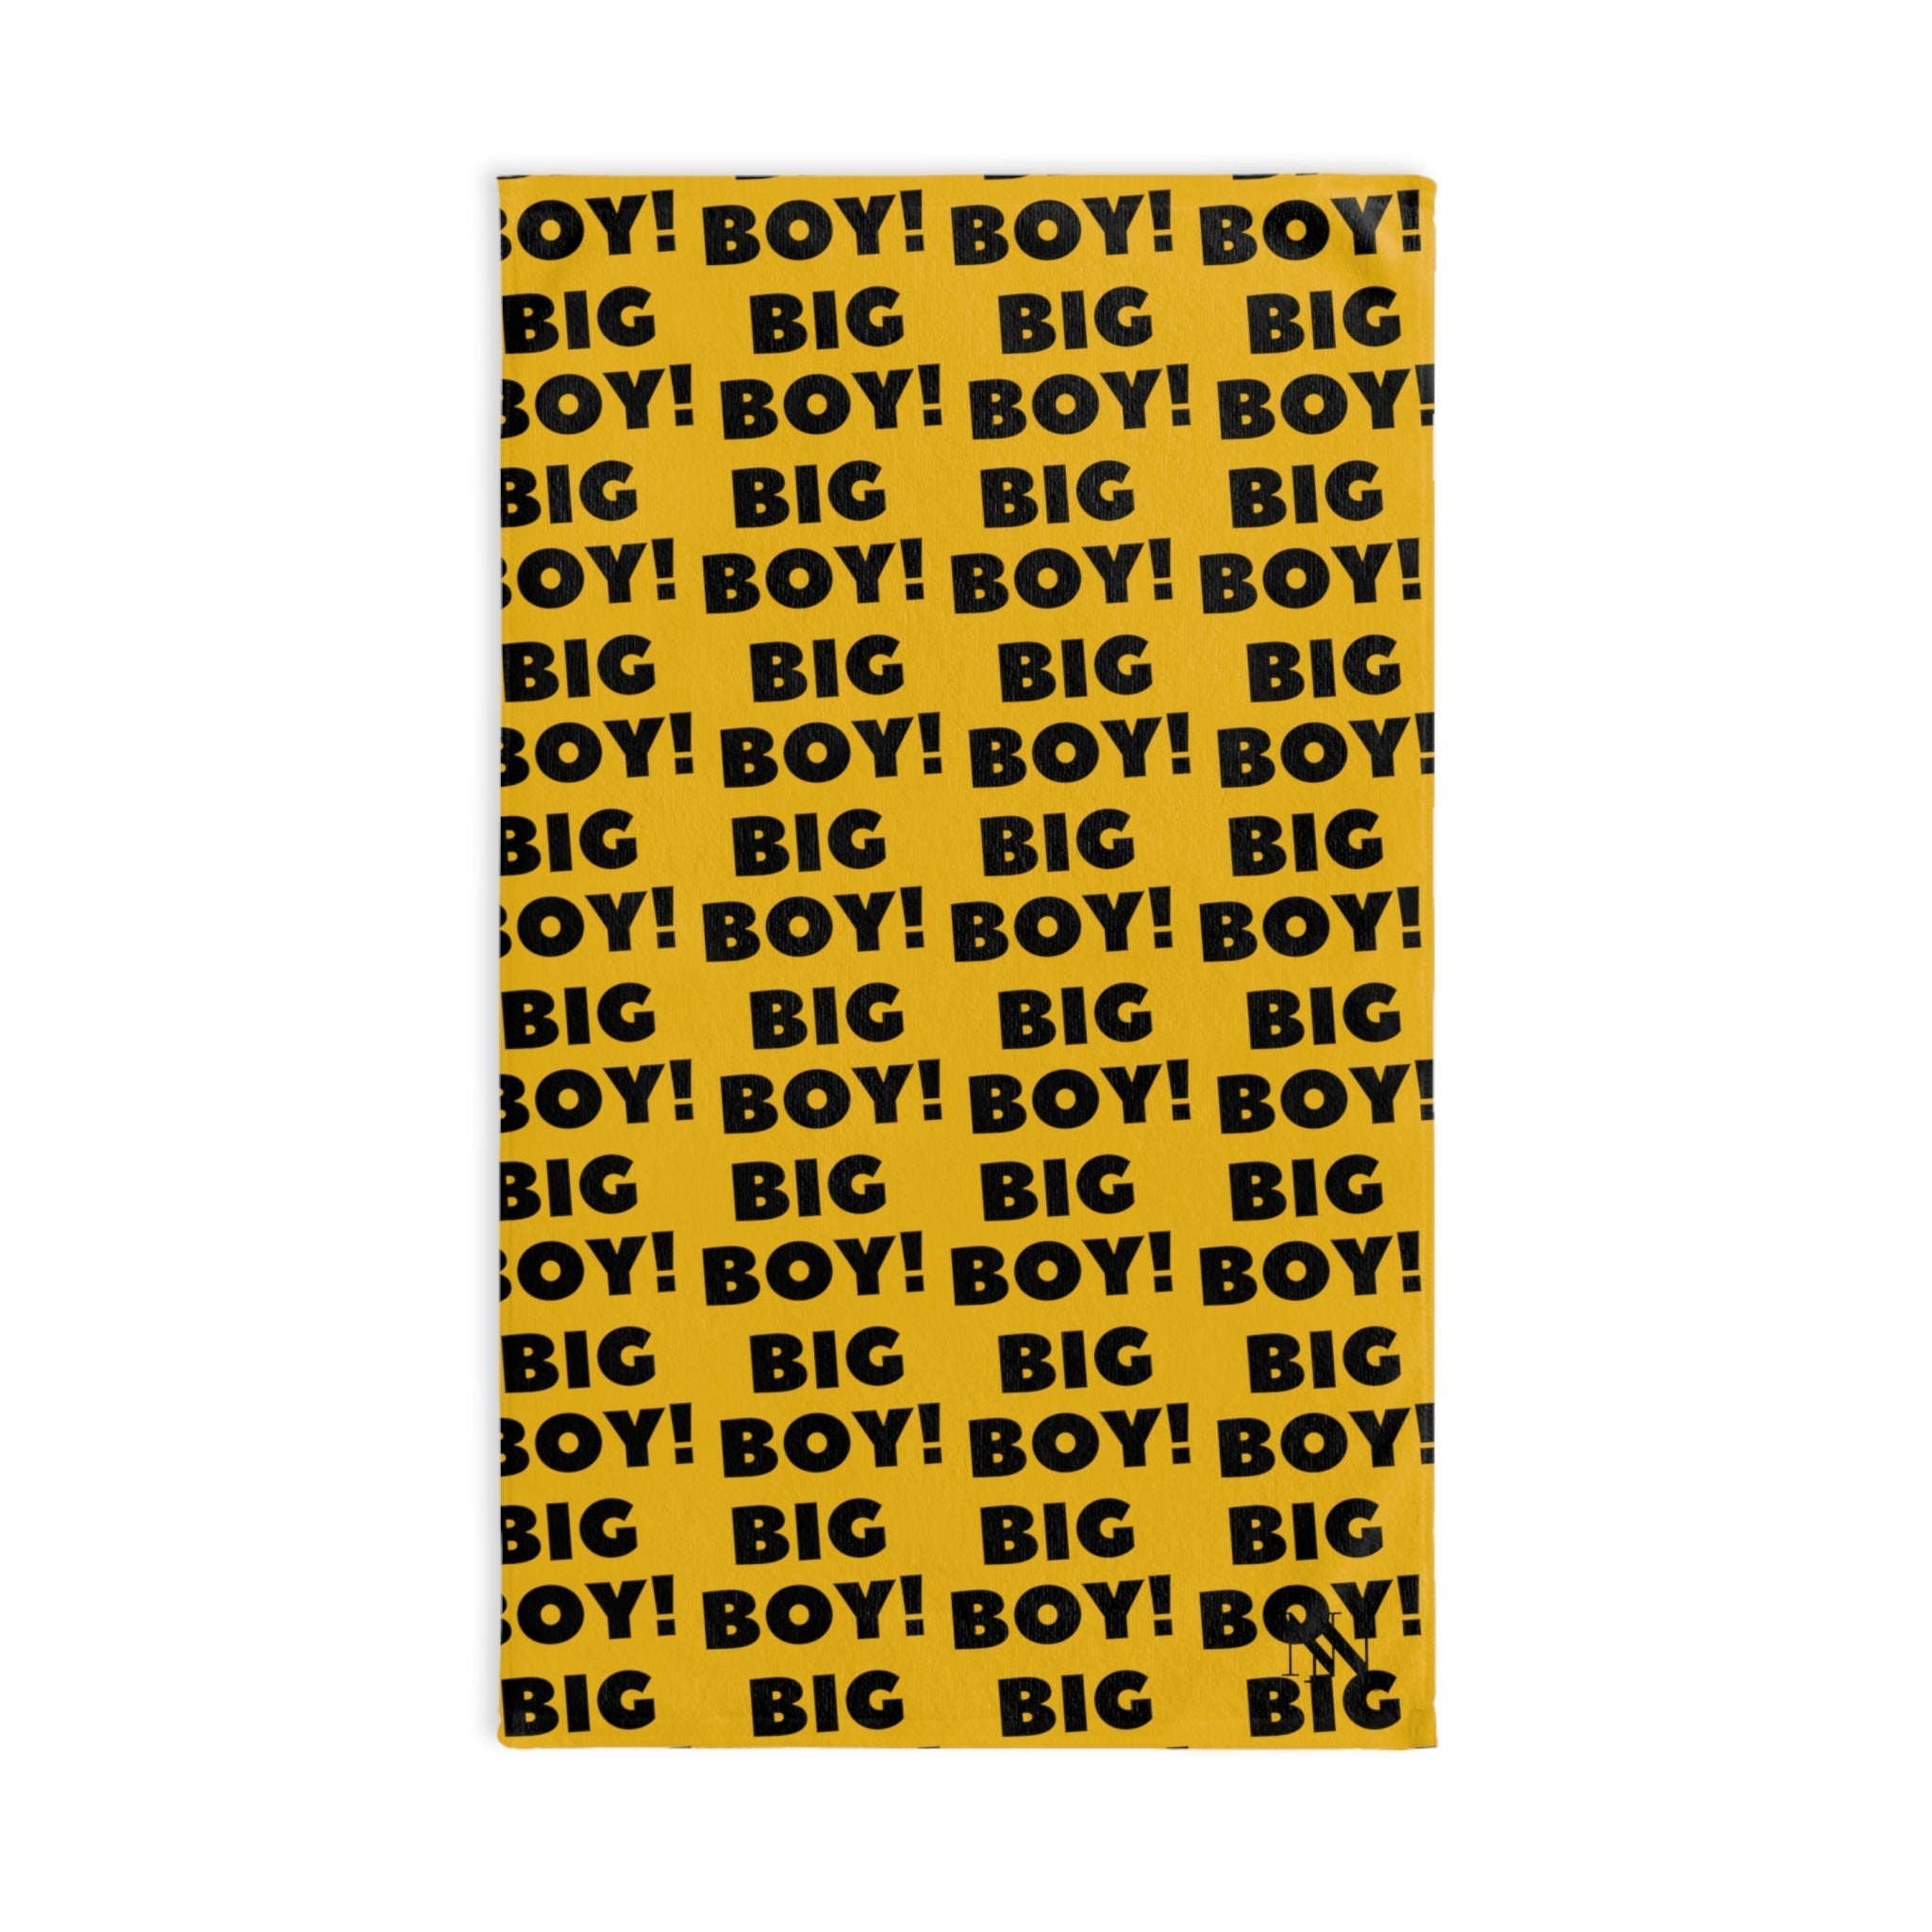 Big Boy Pattern |Gifts for Boyfriend, Funny Towel Romantic Gift for Wedding Couple Fiance First Year Anniversary Valentines, Party Gag Gifts, Joke Humor Cloth for Husband Men BF NECTAR NAPKINS